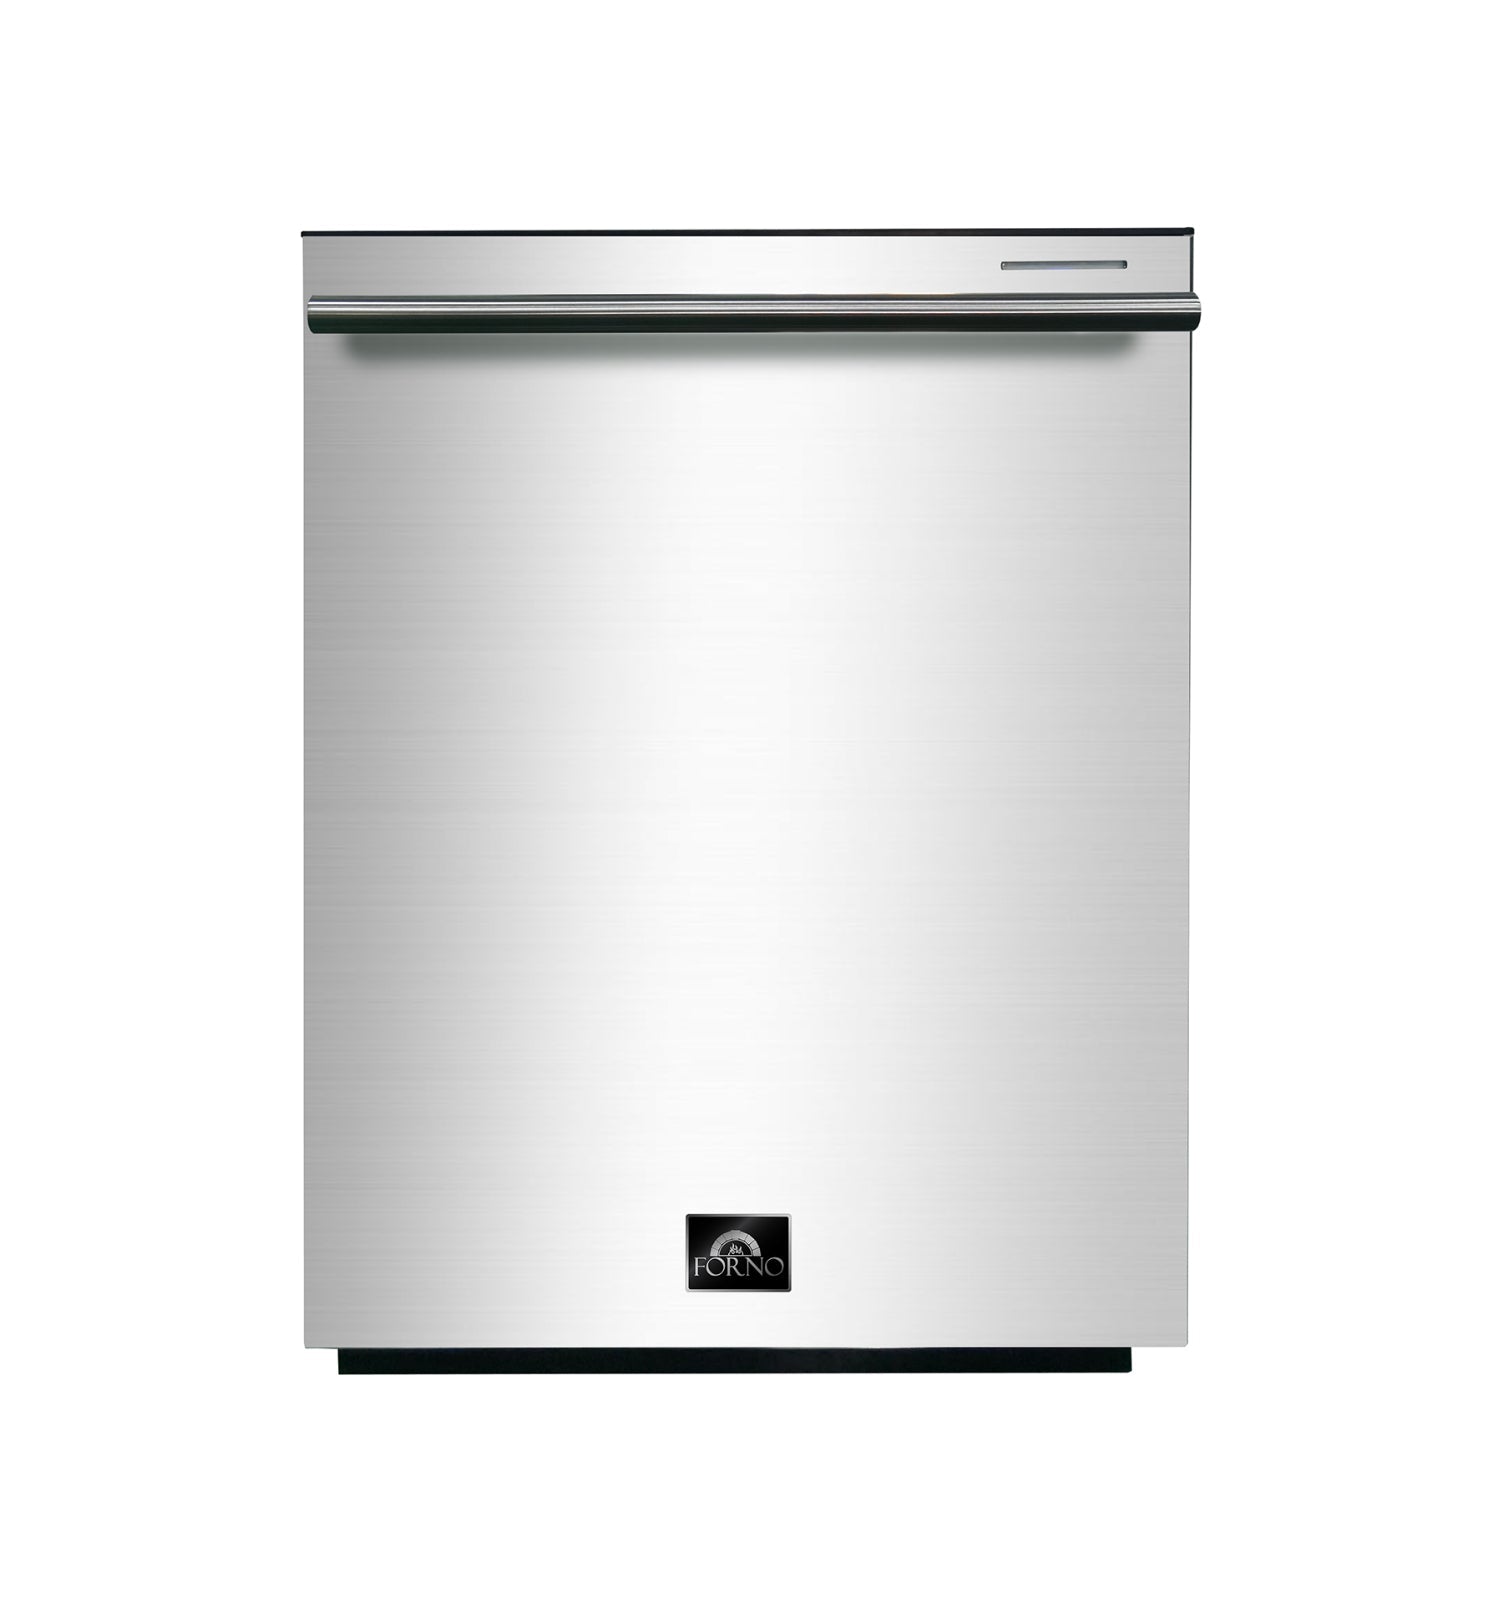 Forno 24 in. Tall Tub Dishwasher in Stainless Steel with Stainless Steel Tub, 45dBa (FDWBI8067-24S)